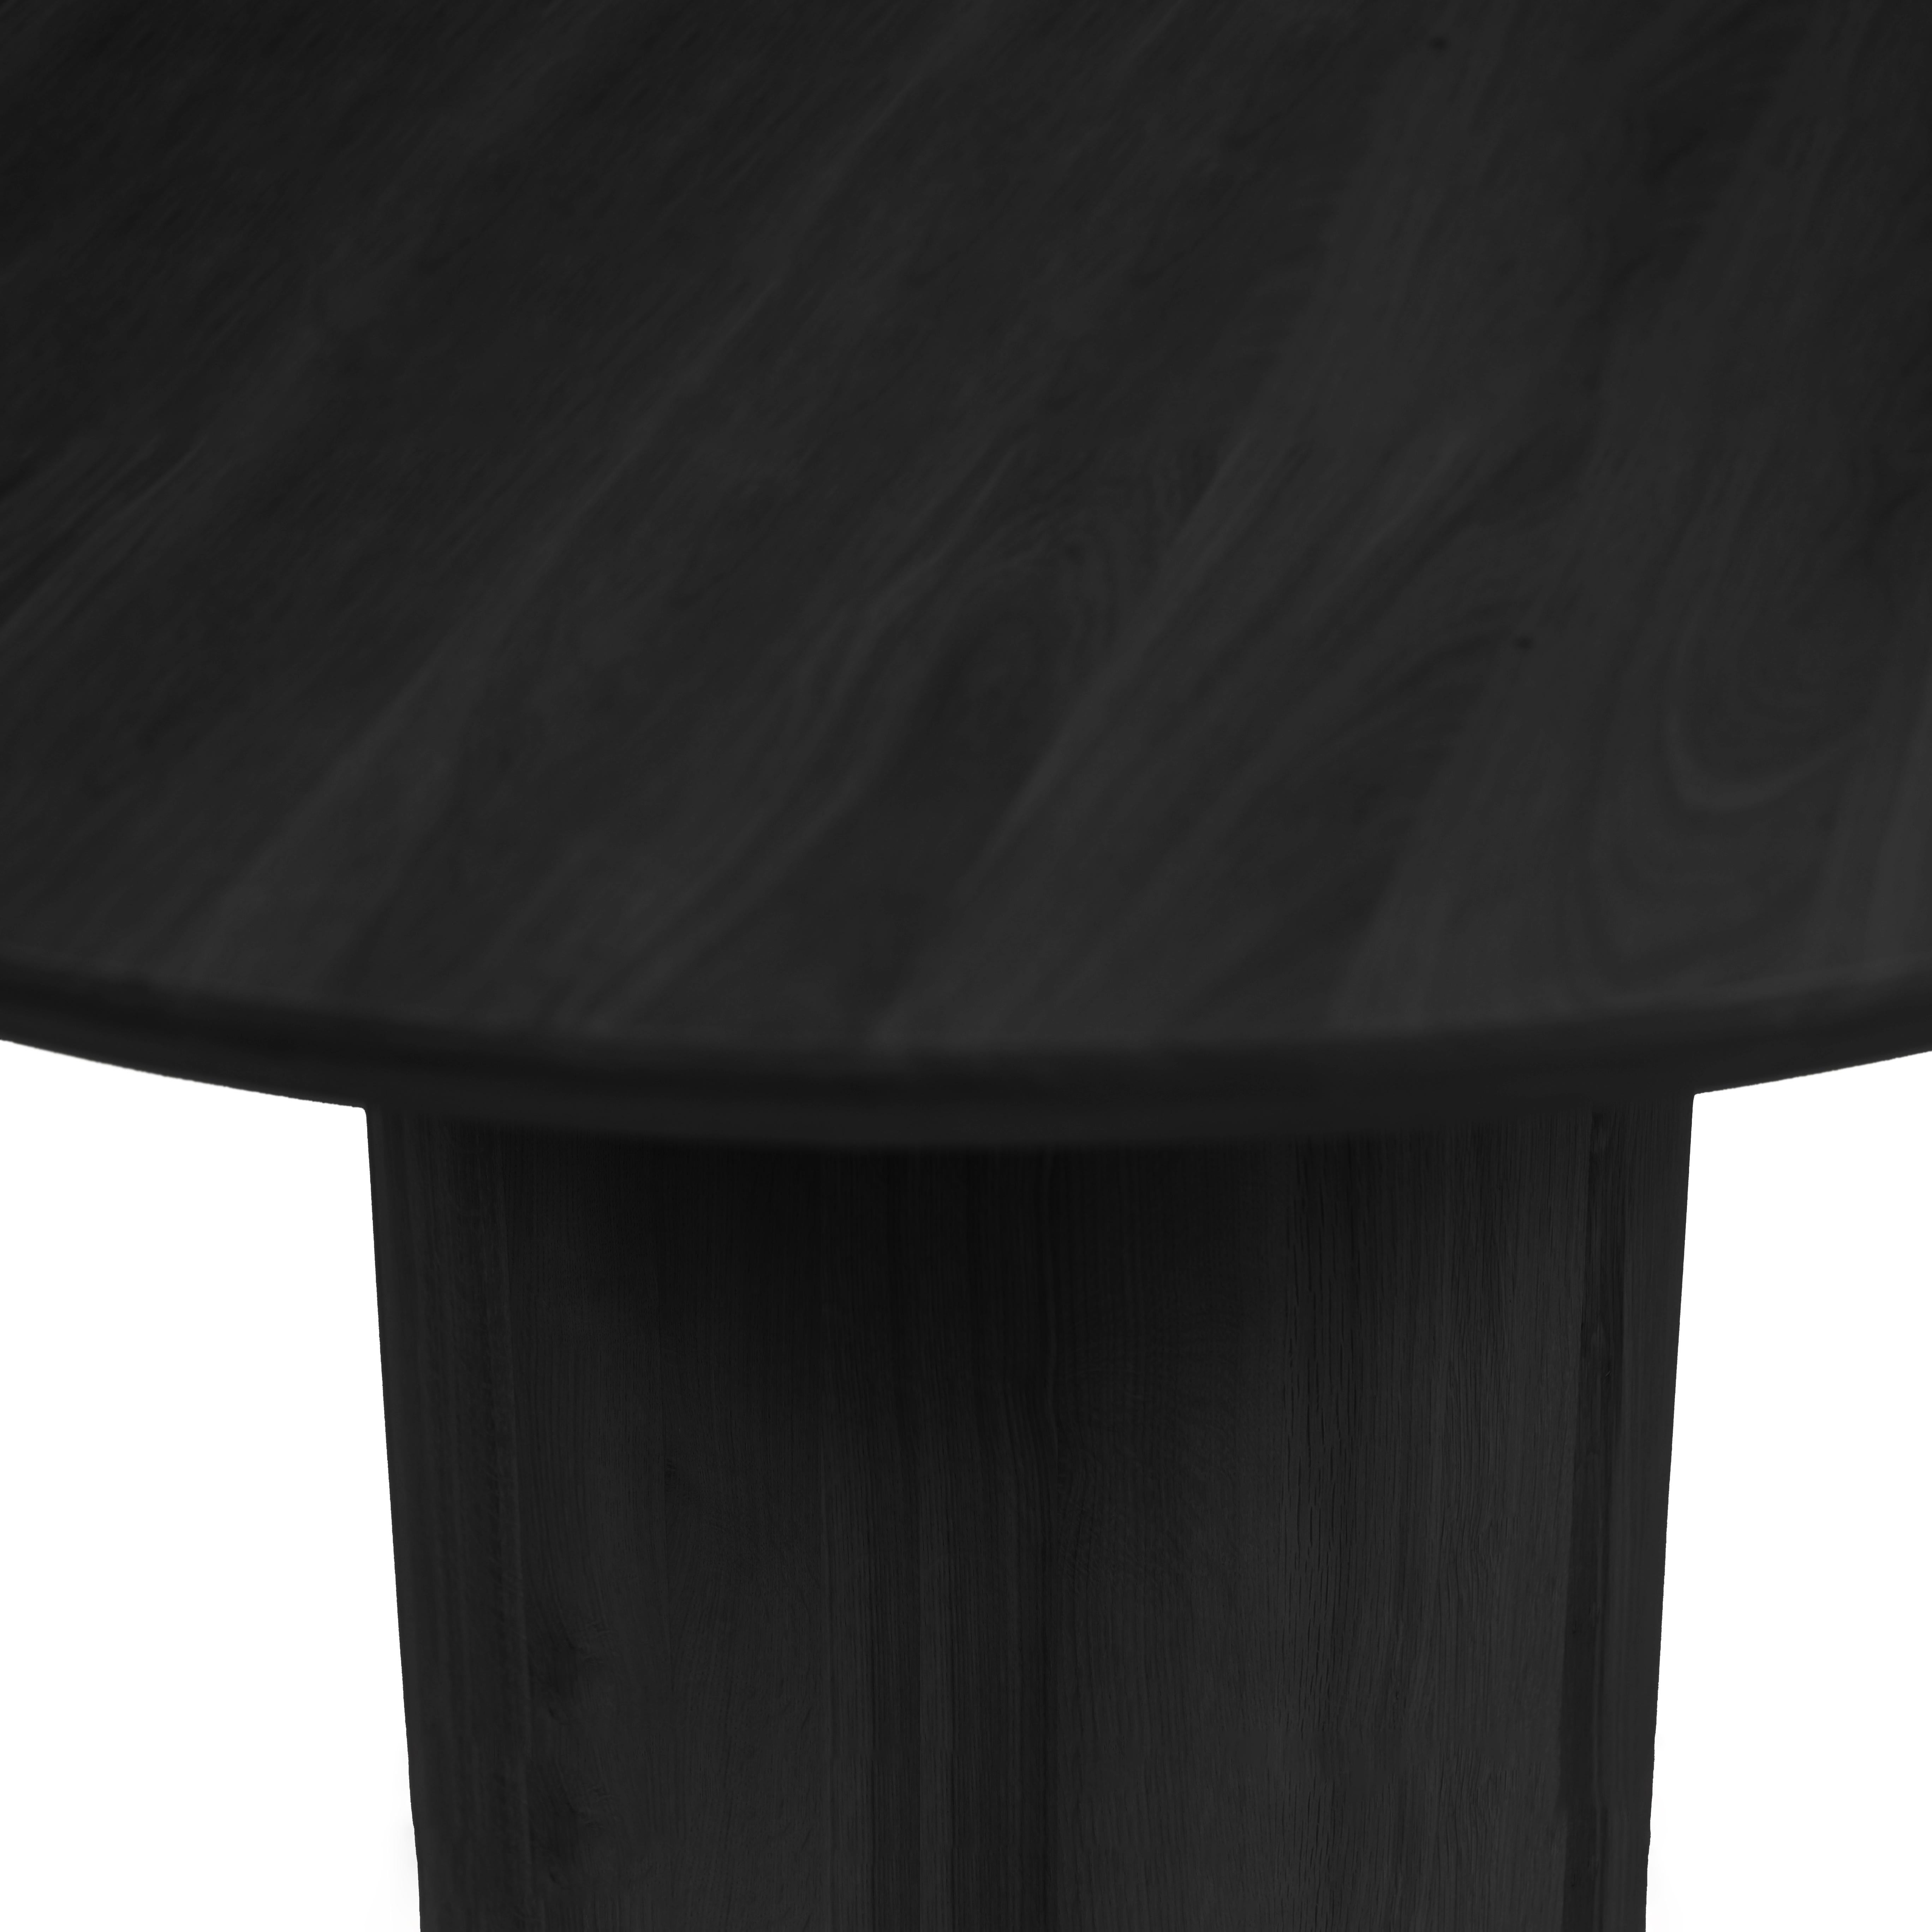 Scar Dining/Meeting Room Table (from The Oak Saga Collection) For Sale 1